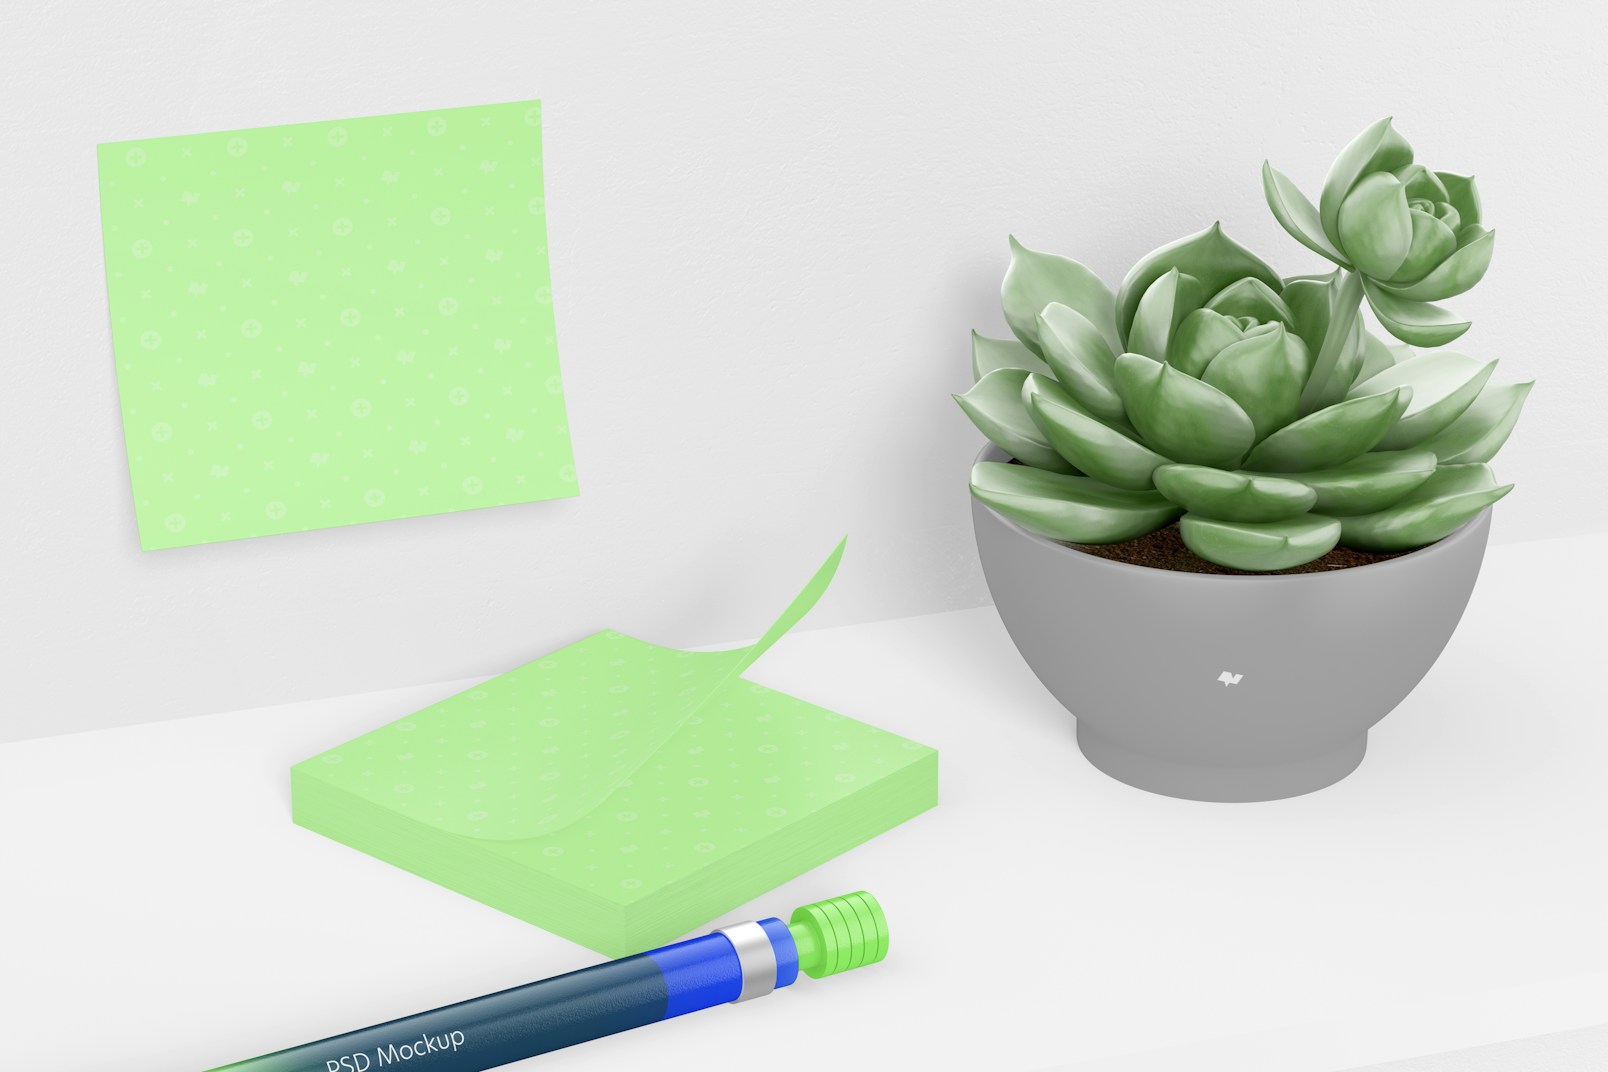 Square Sticky Notes Mockup, on Wall